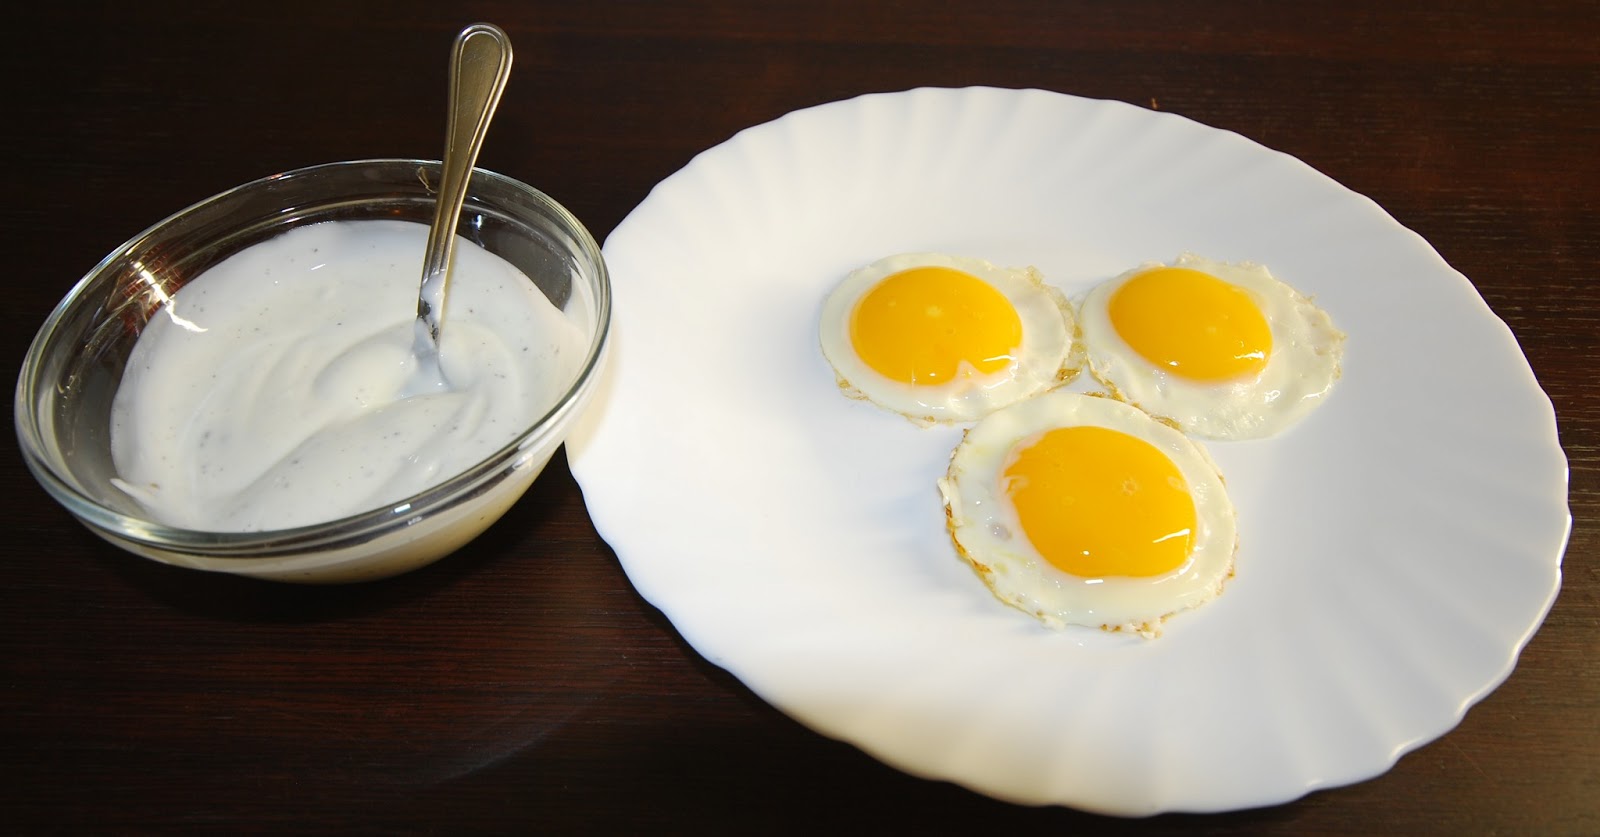 fried eggs with yogurt sauce | chef competition at home